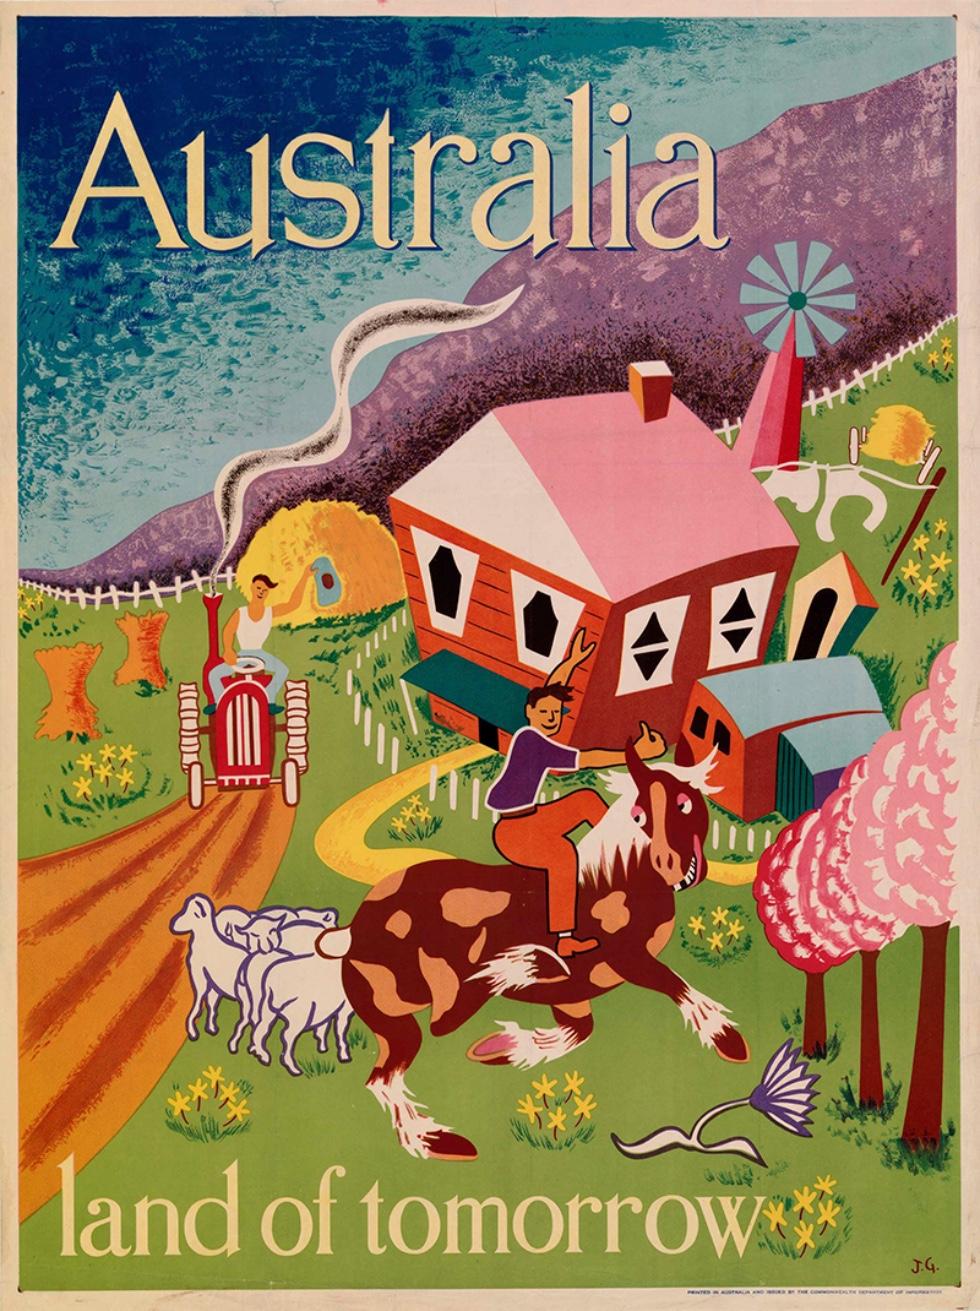 Coloured poster featuring a caricatured rural scene: a person driving a tractor past a farmhouse with windmill and clothesline. Another person riding a smiling horse. 